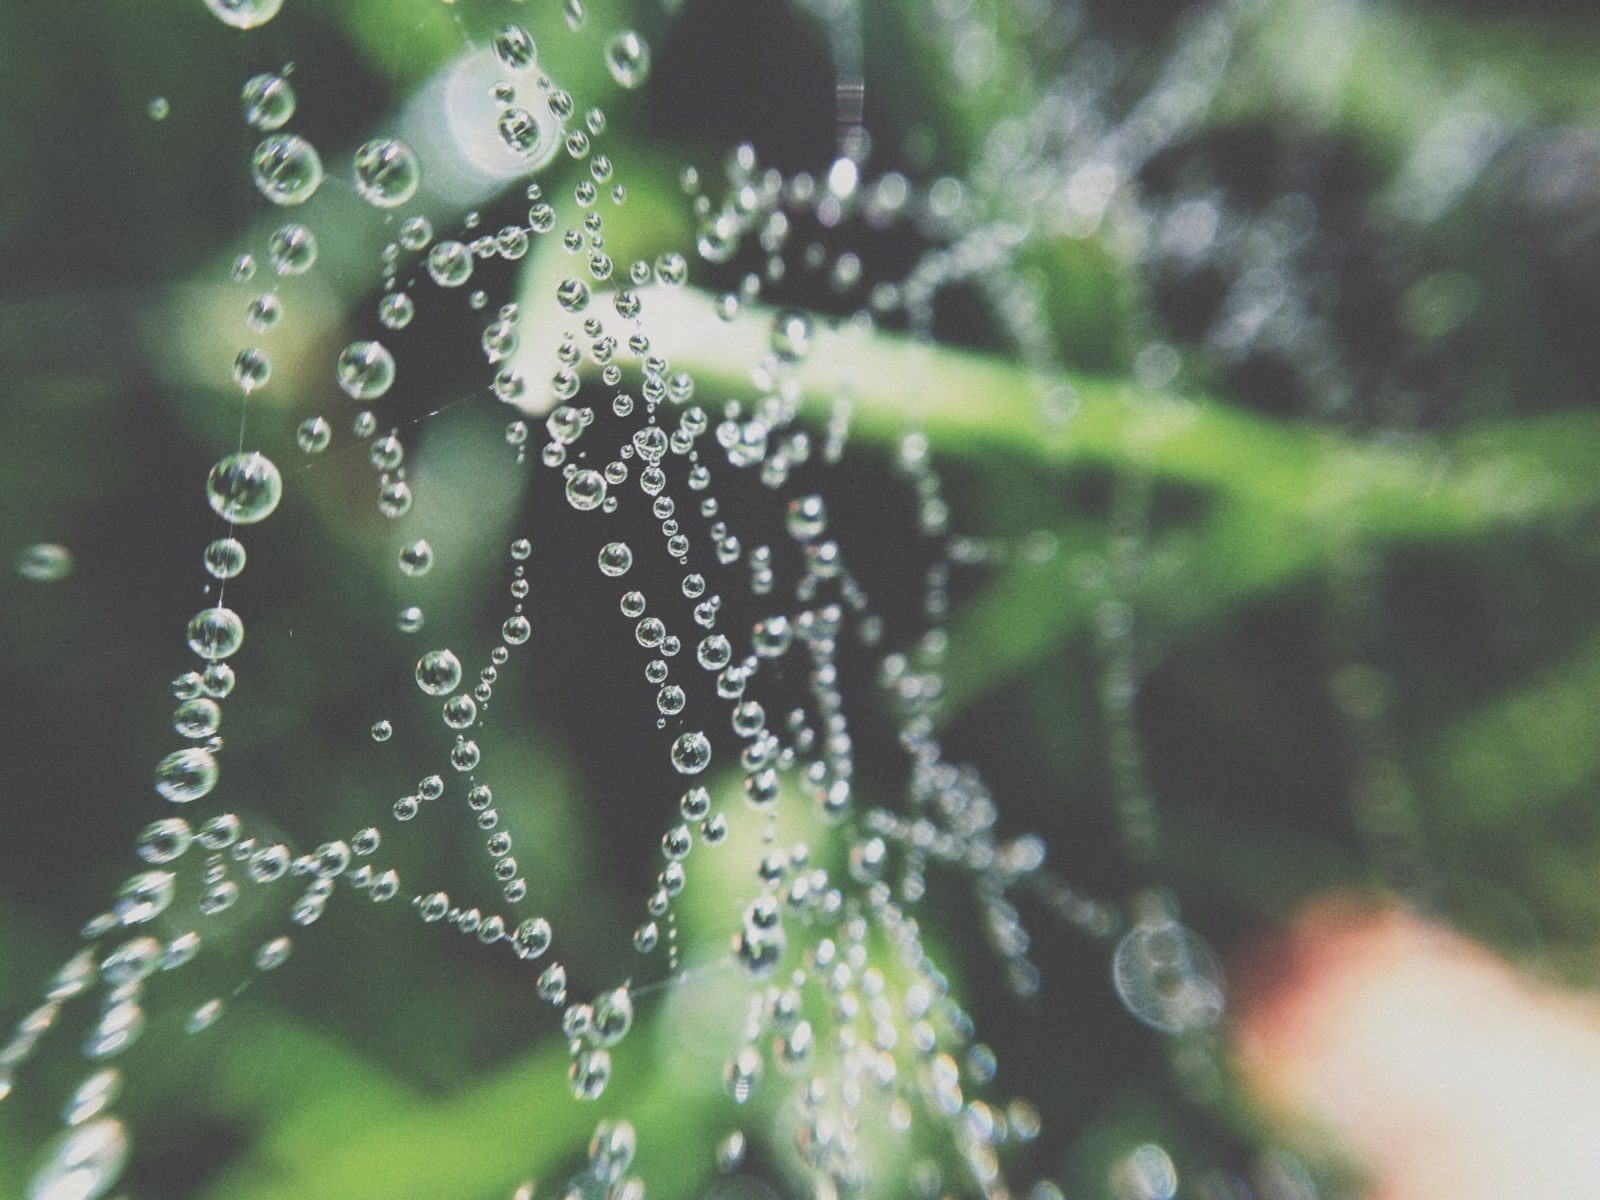 A spiderweb with droplets of dew on it